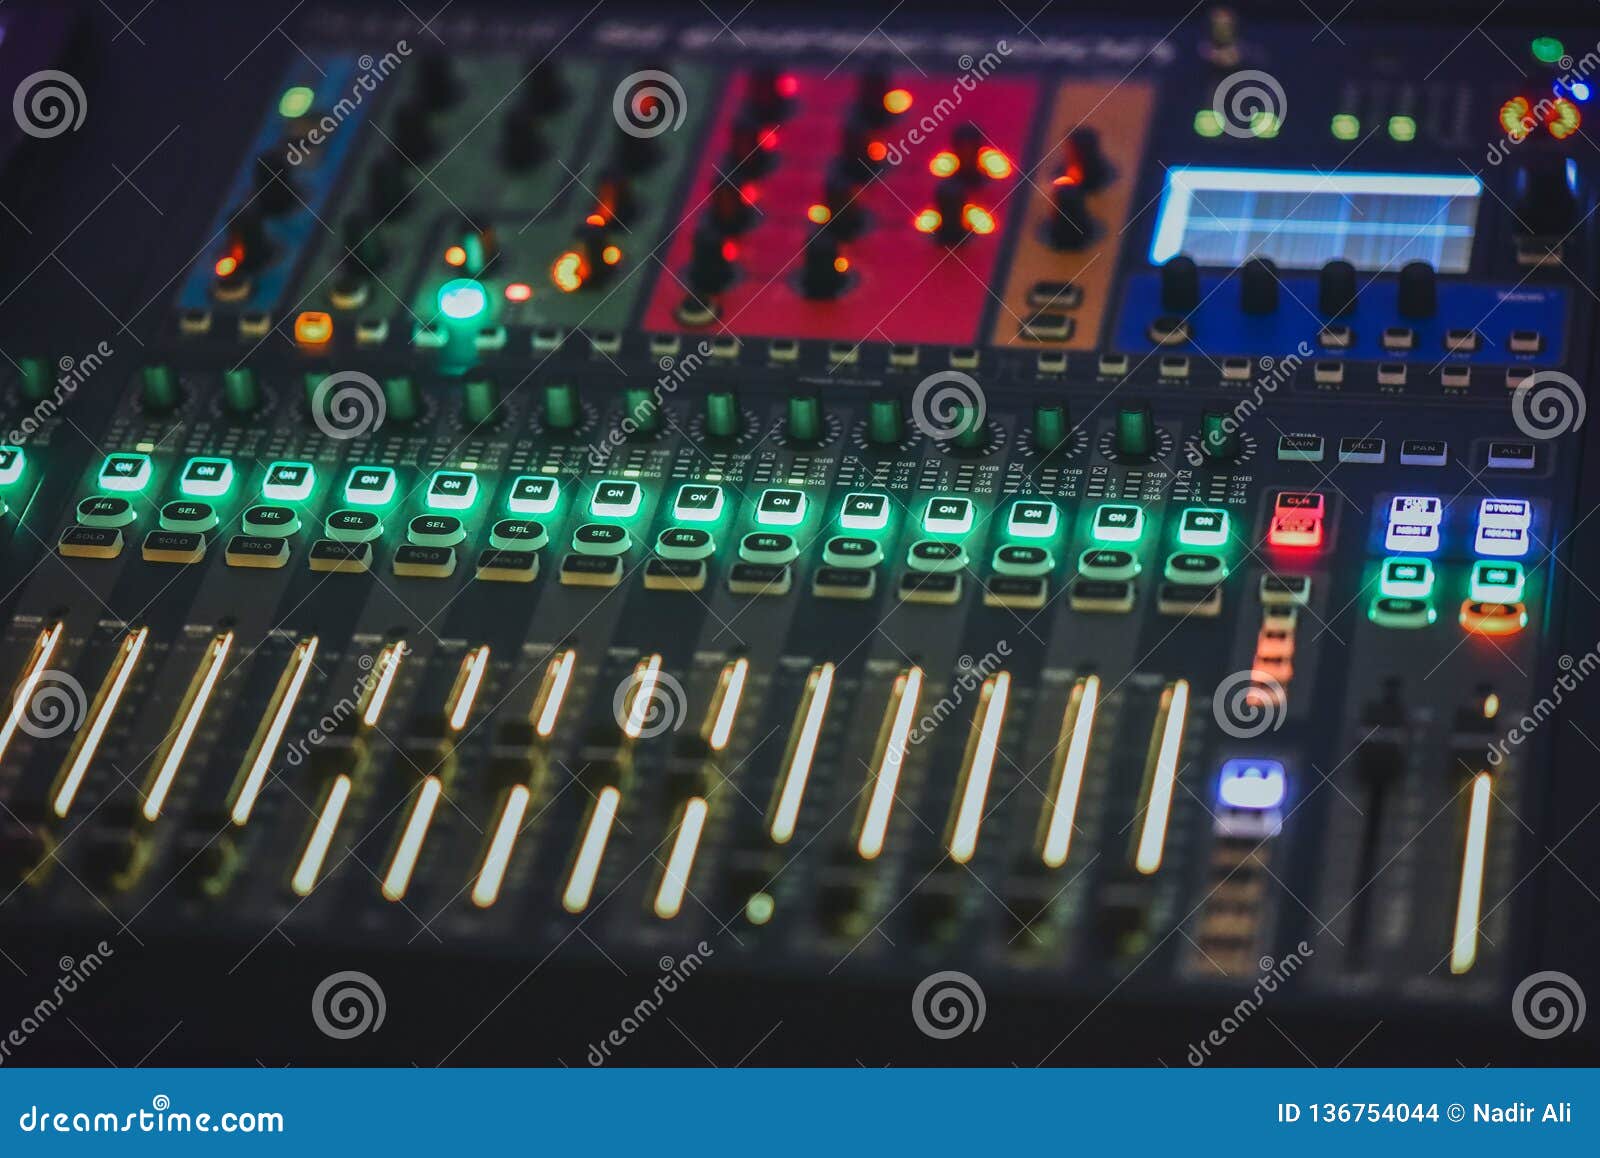 dj mixer and music switchboard